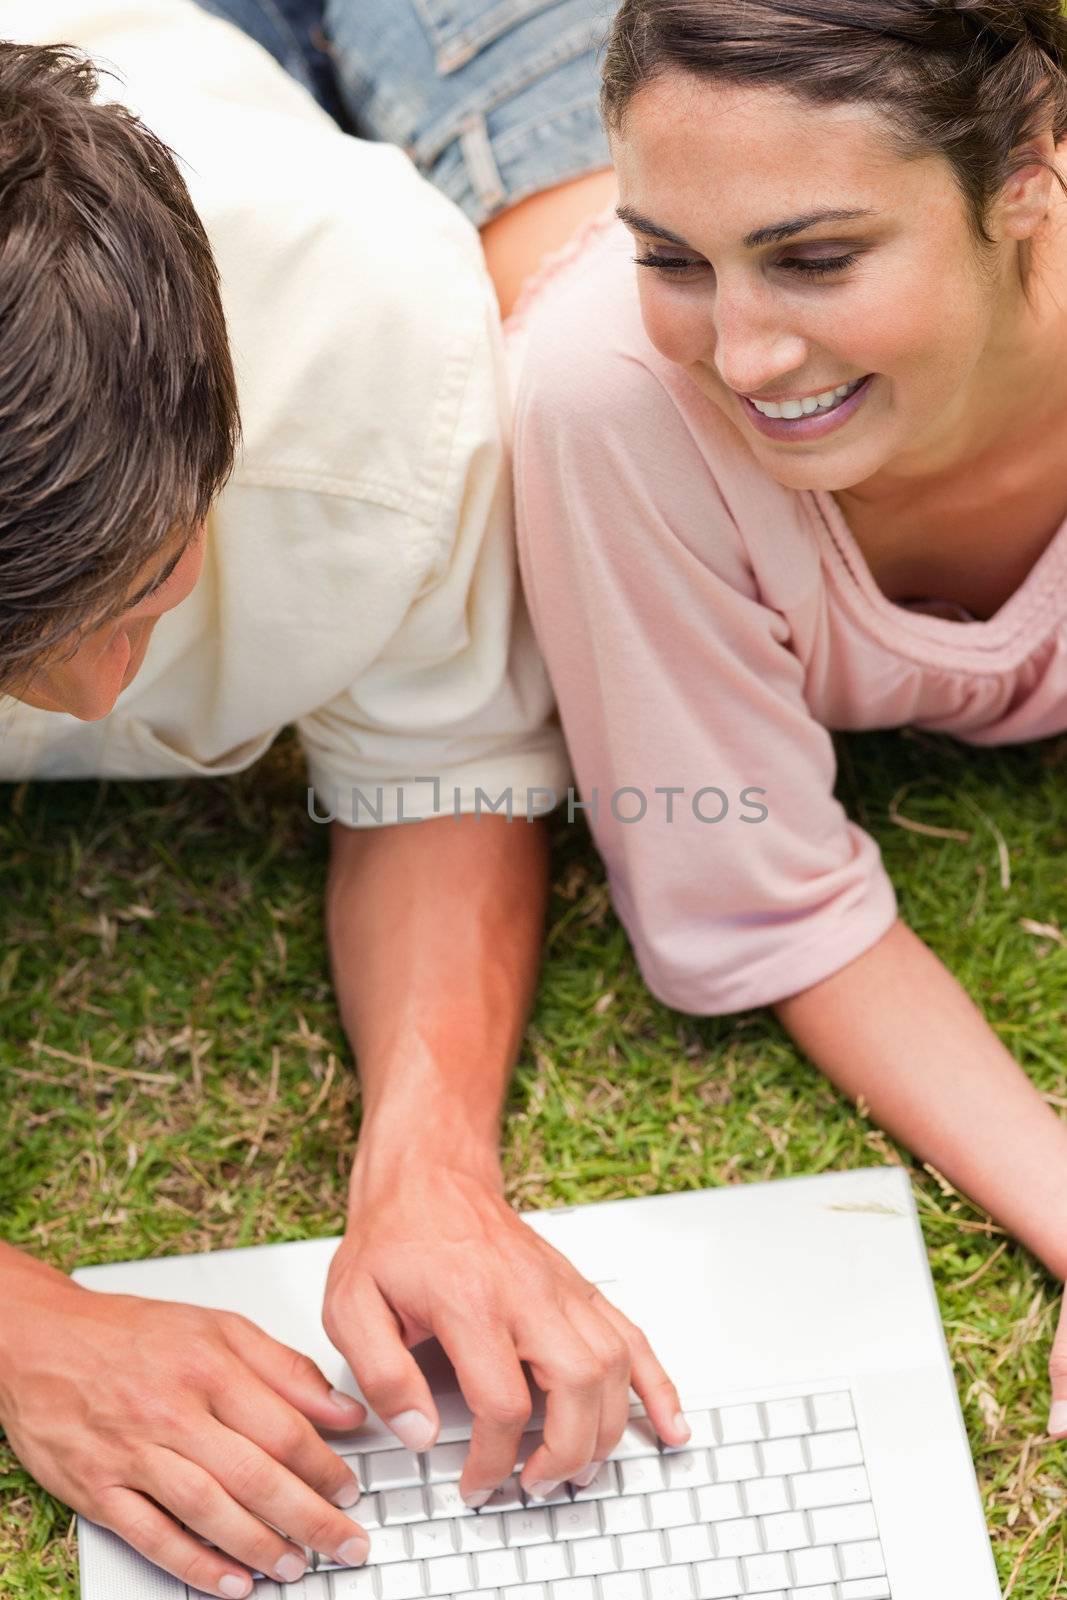 Two friends smiling while lying in the grass together and using the laptop which is in front of them